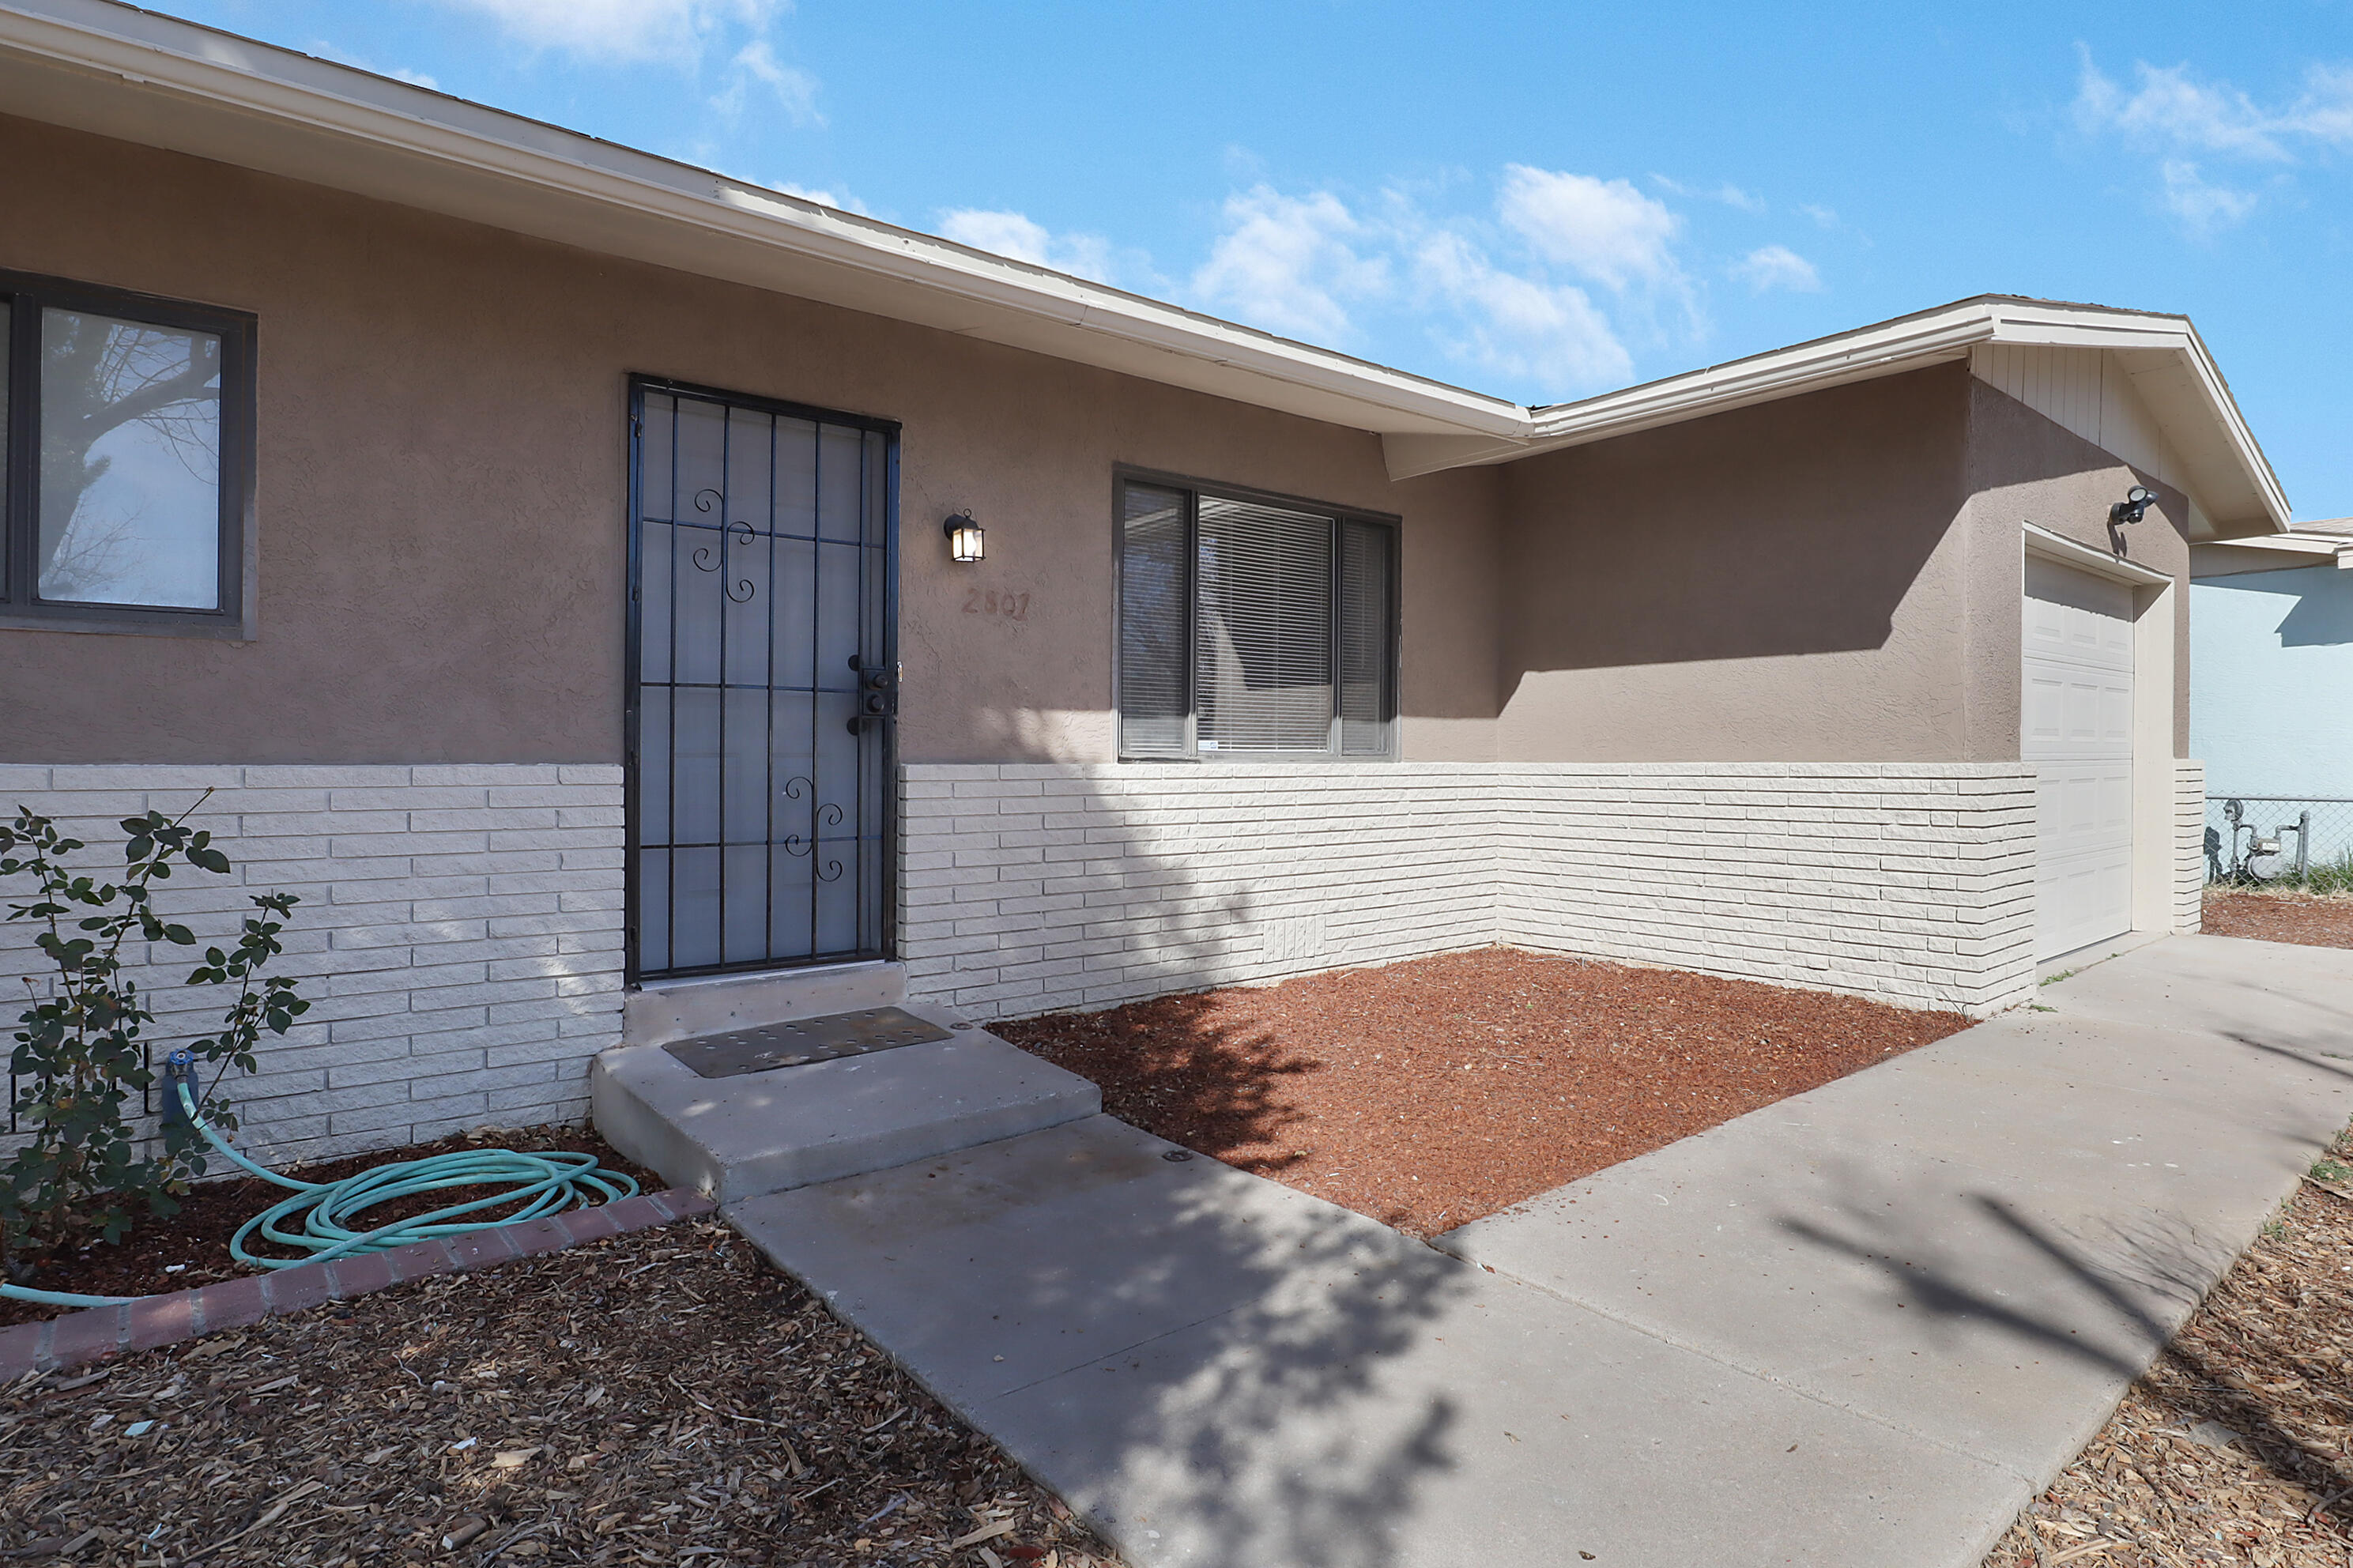 Welcome to this beautiful remodeled on the North Valley community. This nice house Offers 3 Bed/1.5 Bath with a back yard.  New Stainless-Steel appliances.  Come and take  a look at this home today.   READY TO MOVE IN!!!